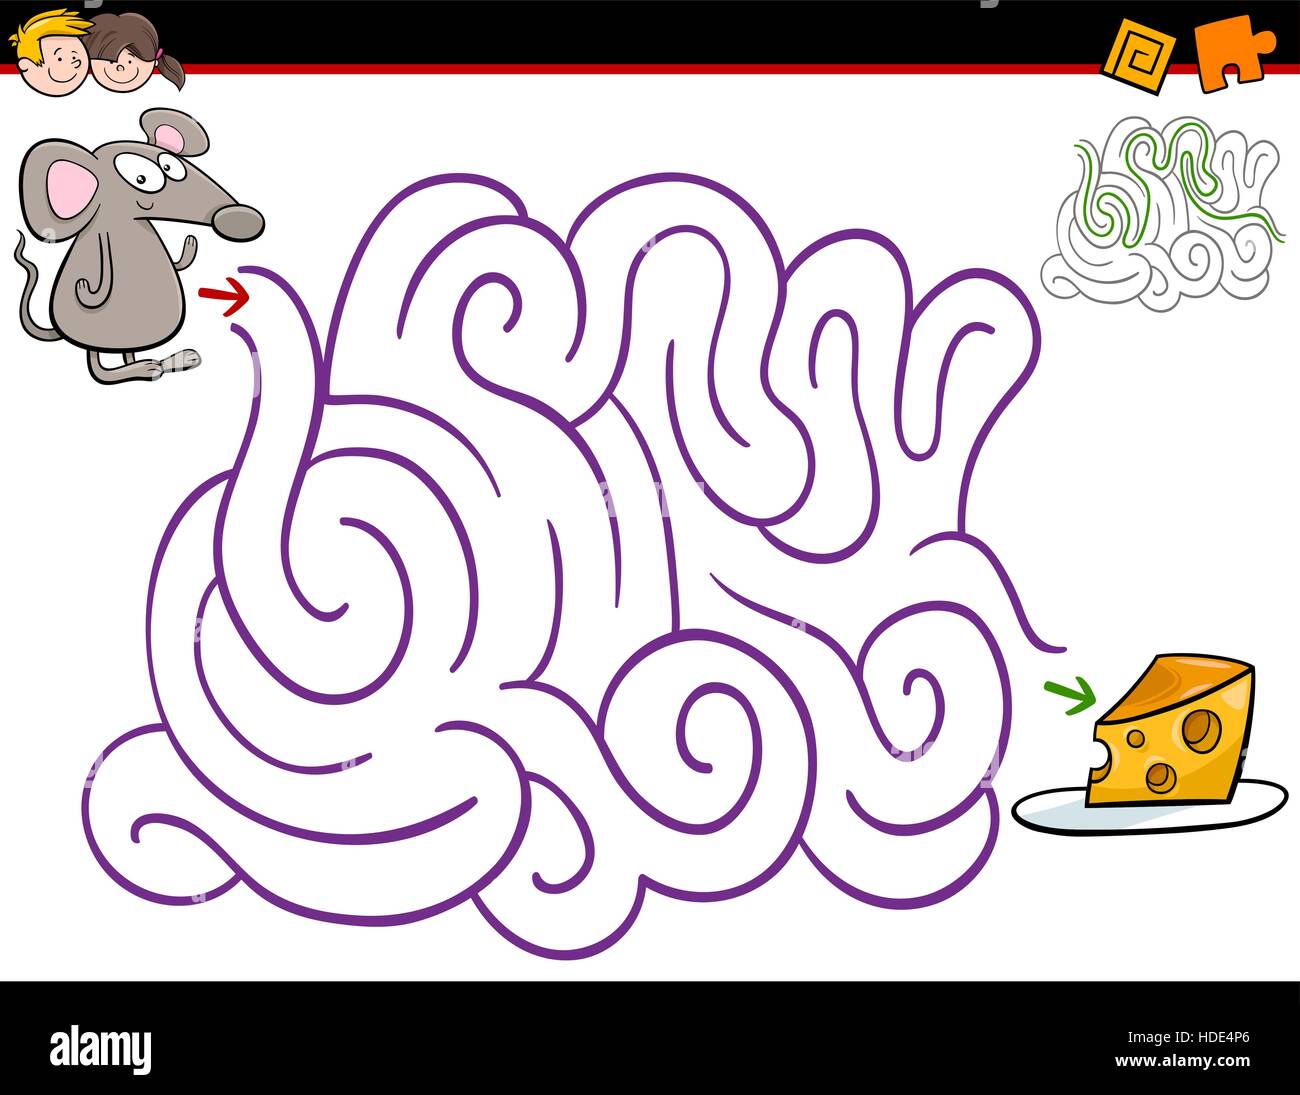 Cartoon Illustration of Education Maze or Labyrinth Activity Game for Children with Mouse and Cheese Stock Vector